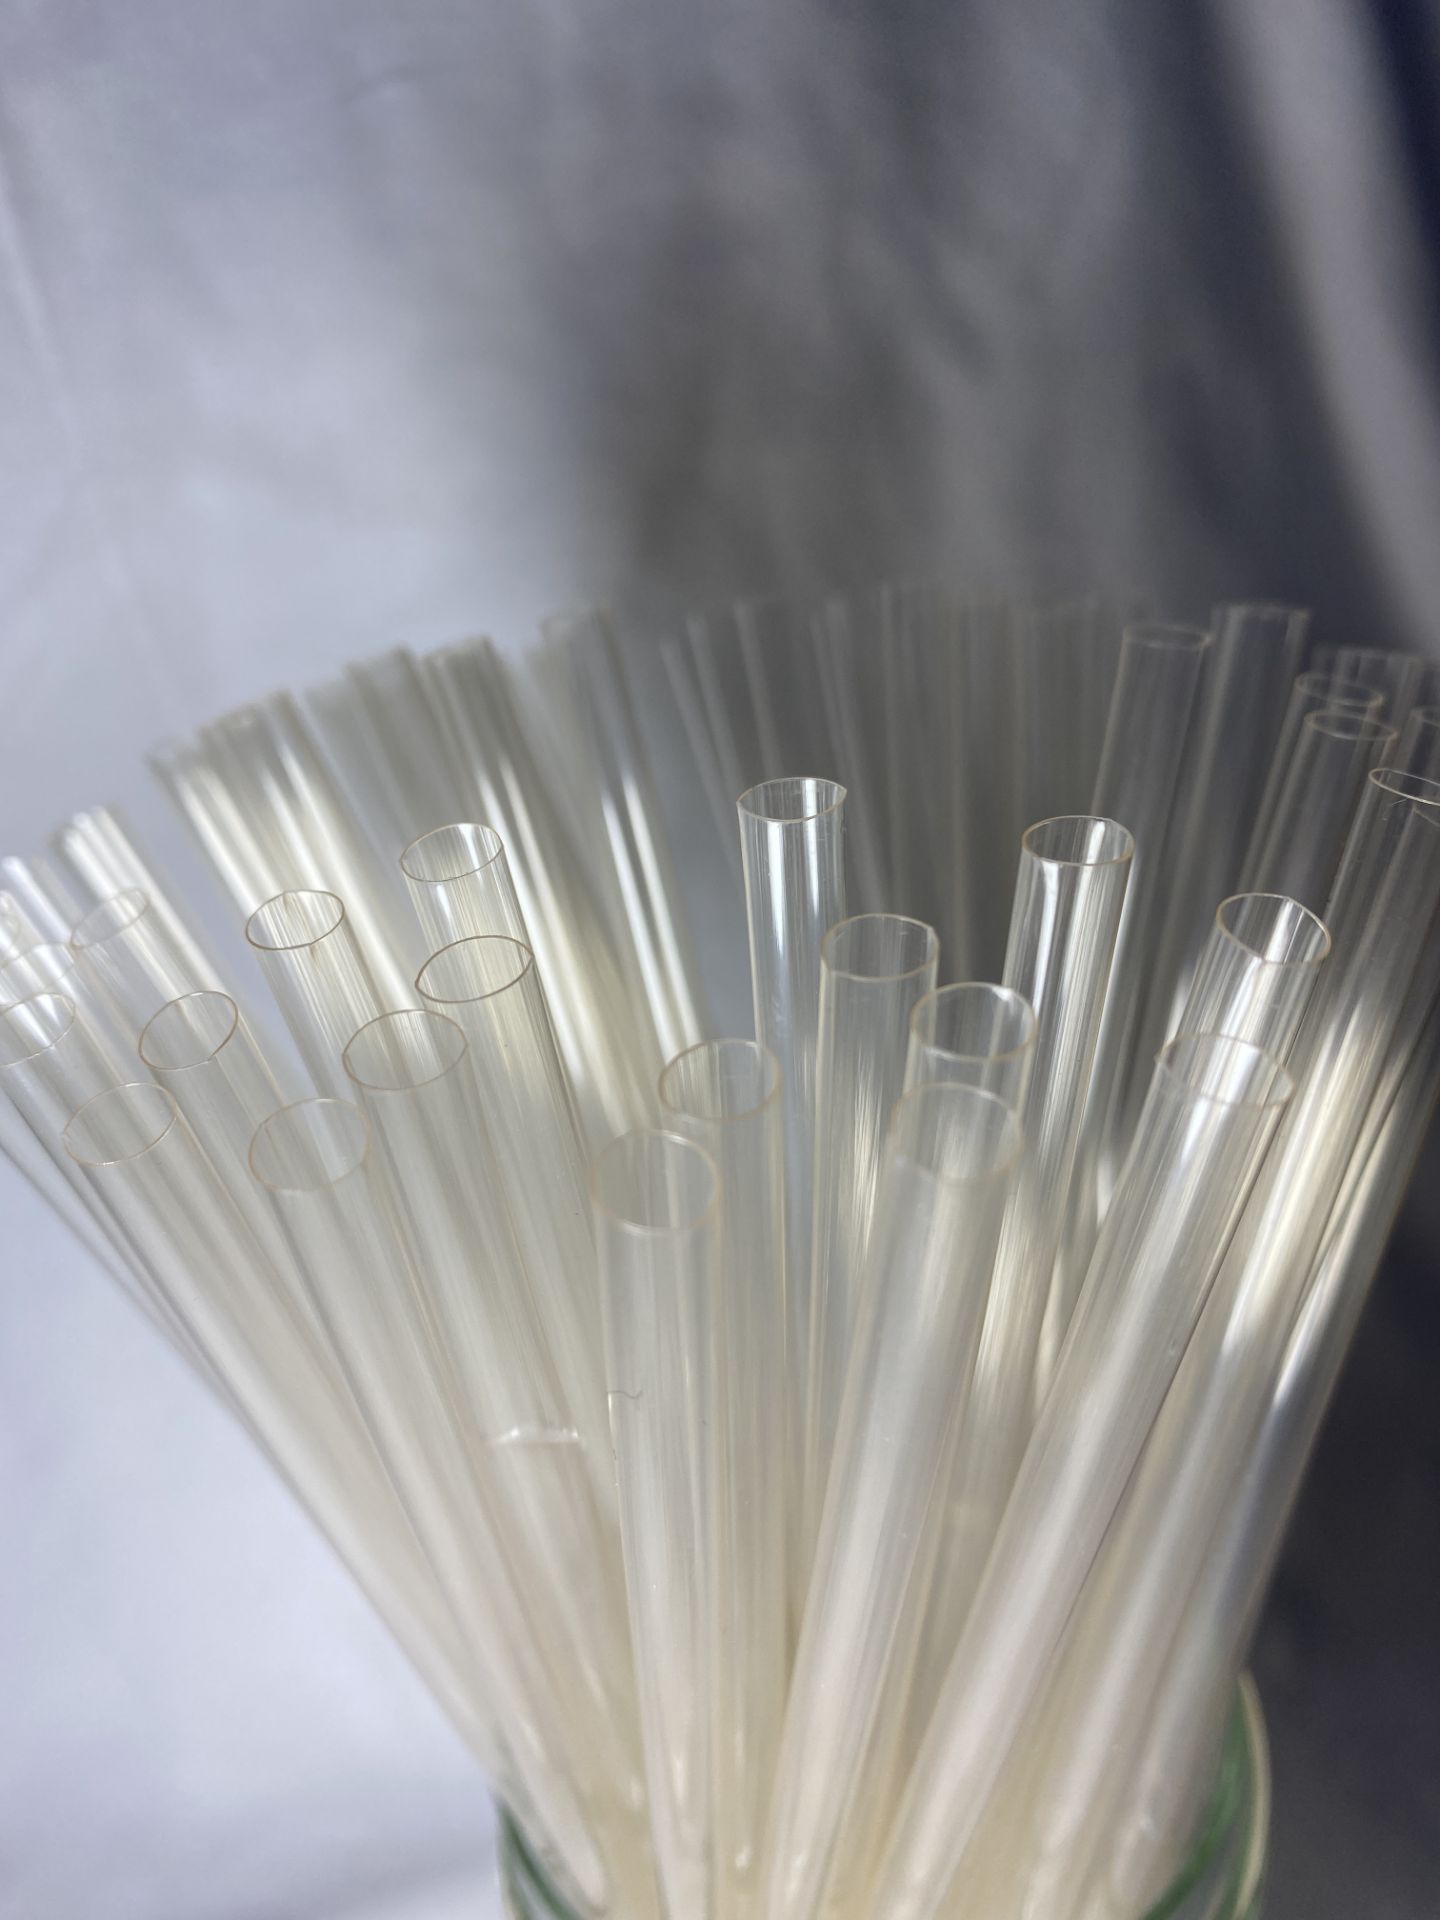 2 x Boxes of Clear PLA Compostable Jumbo Straws by 888 Gastro Disposables | DSP59 - Image 2 of 2